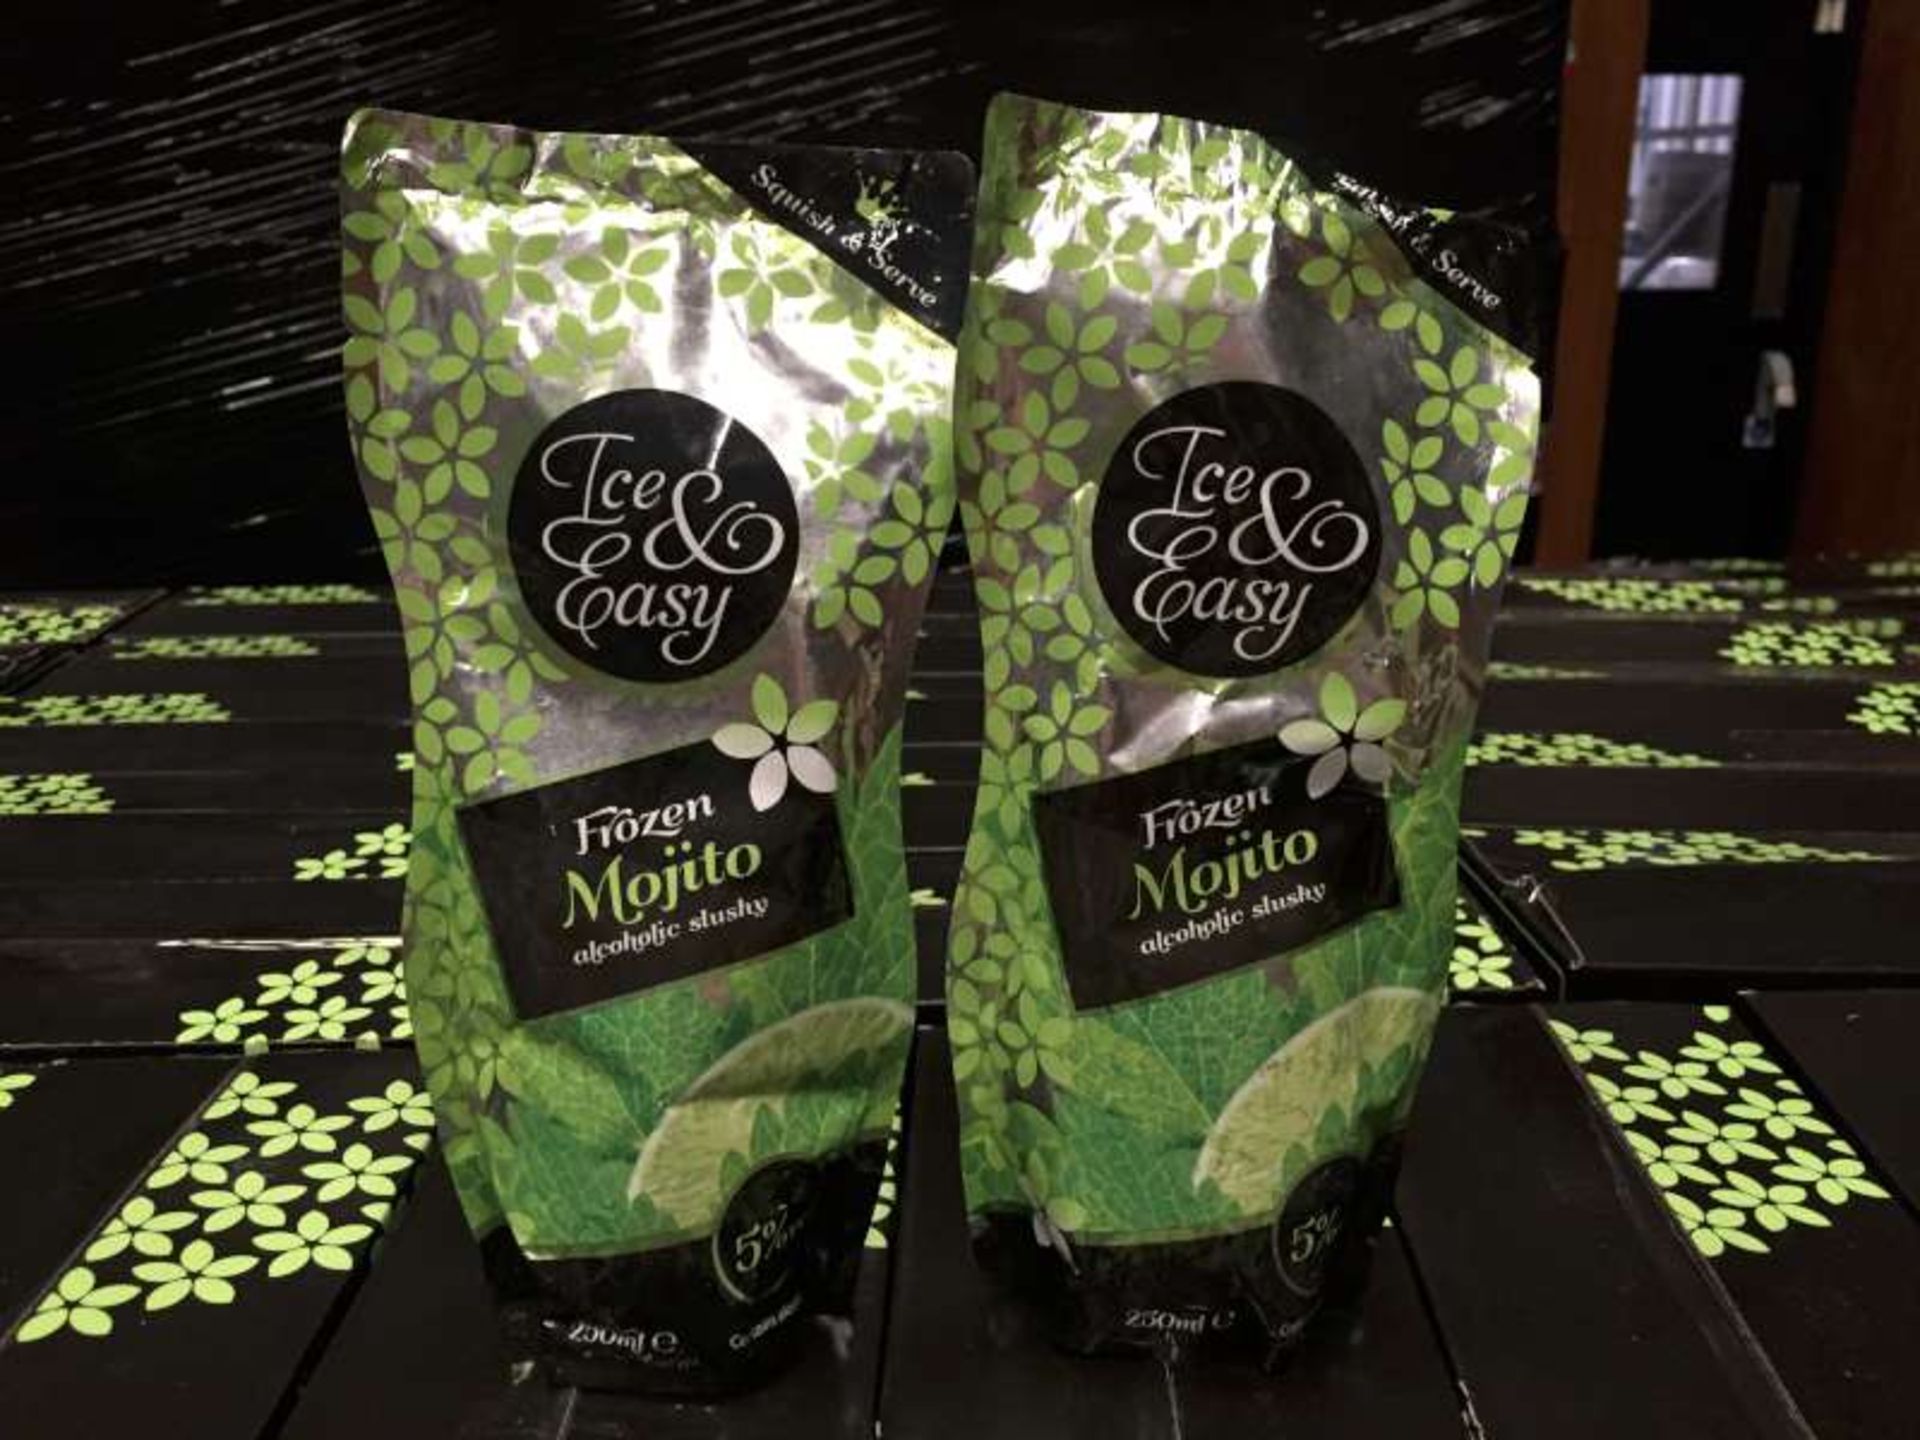 99 X 250 ML POUCHES OF ICE AND EASY MOJITO ALCOHOLIC SLUSHY IN 11 BOXES BEST BEFORE 08/2018